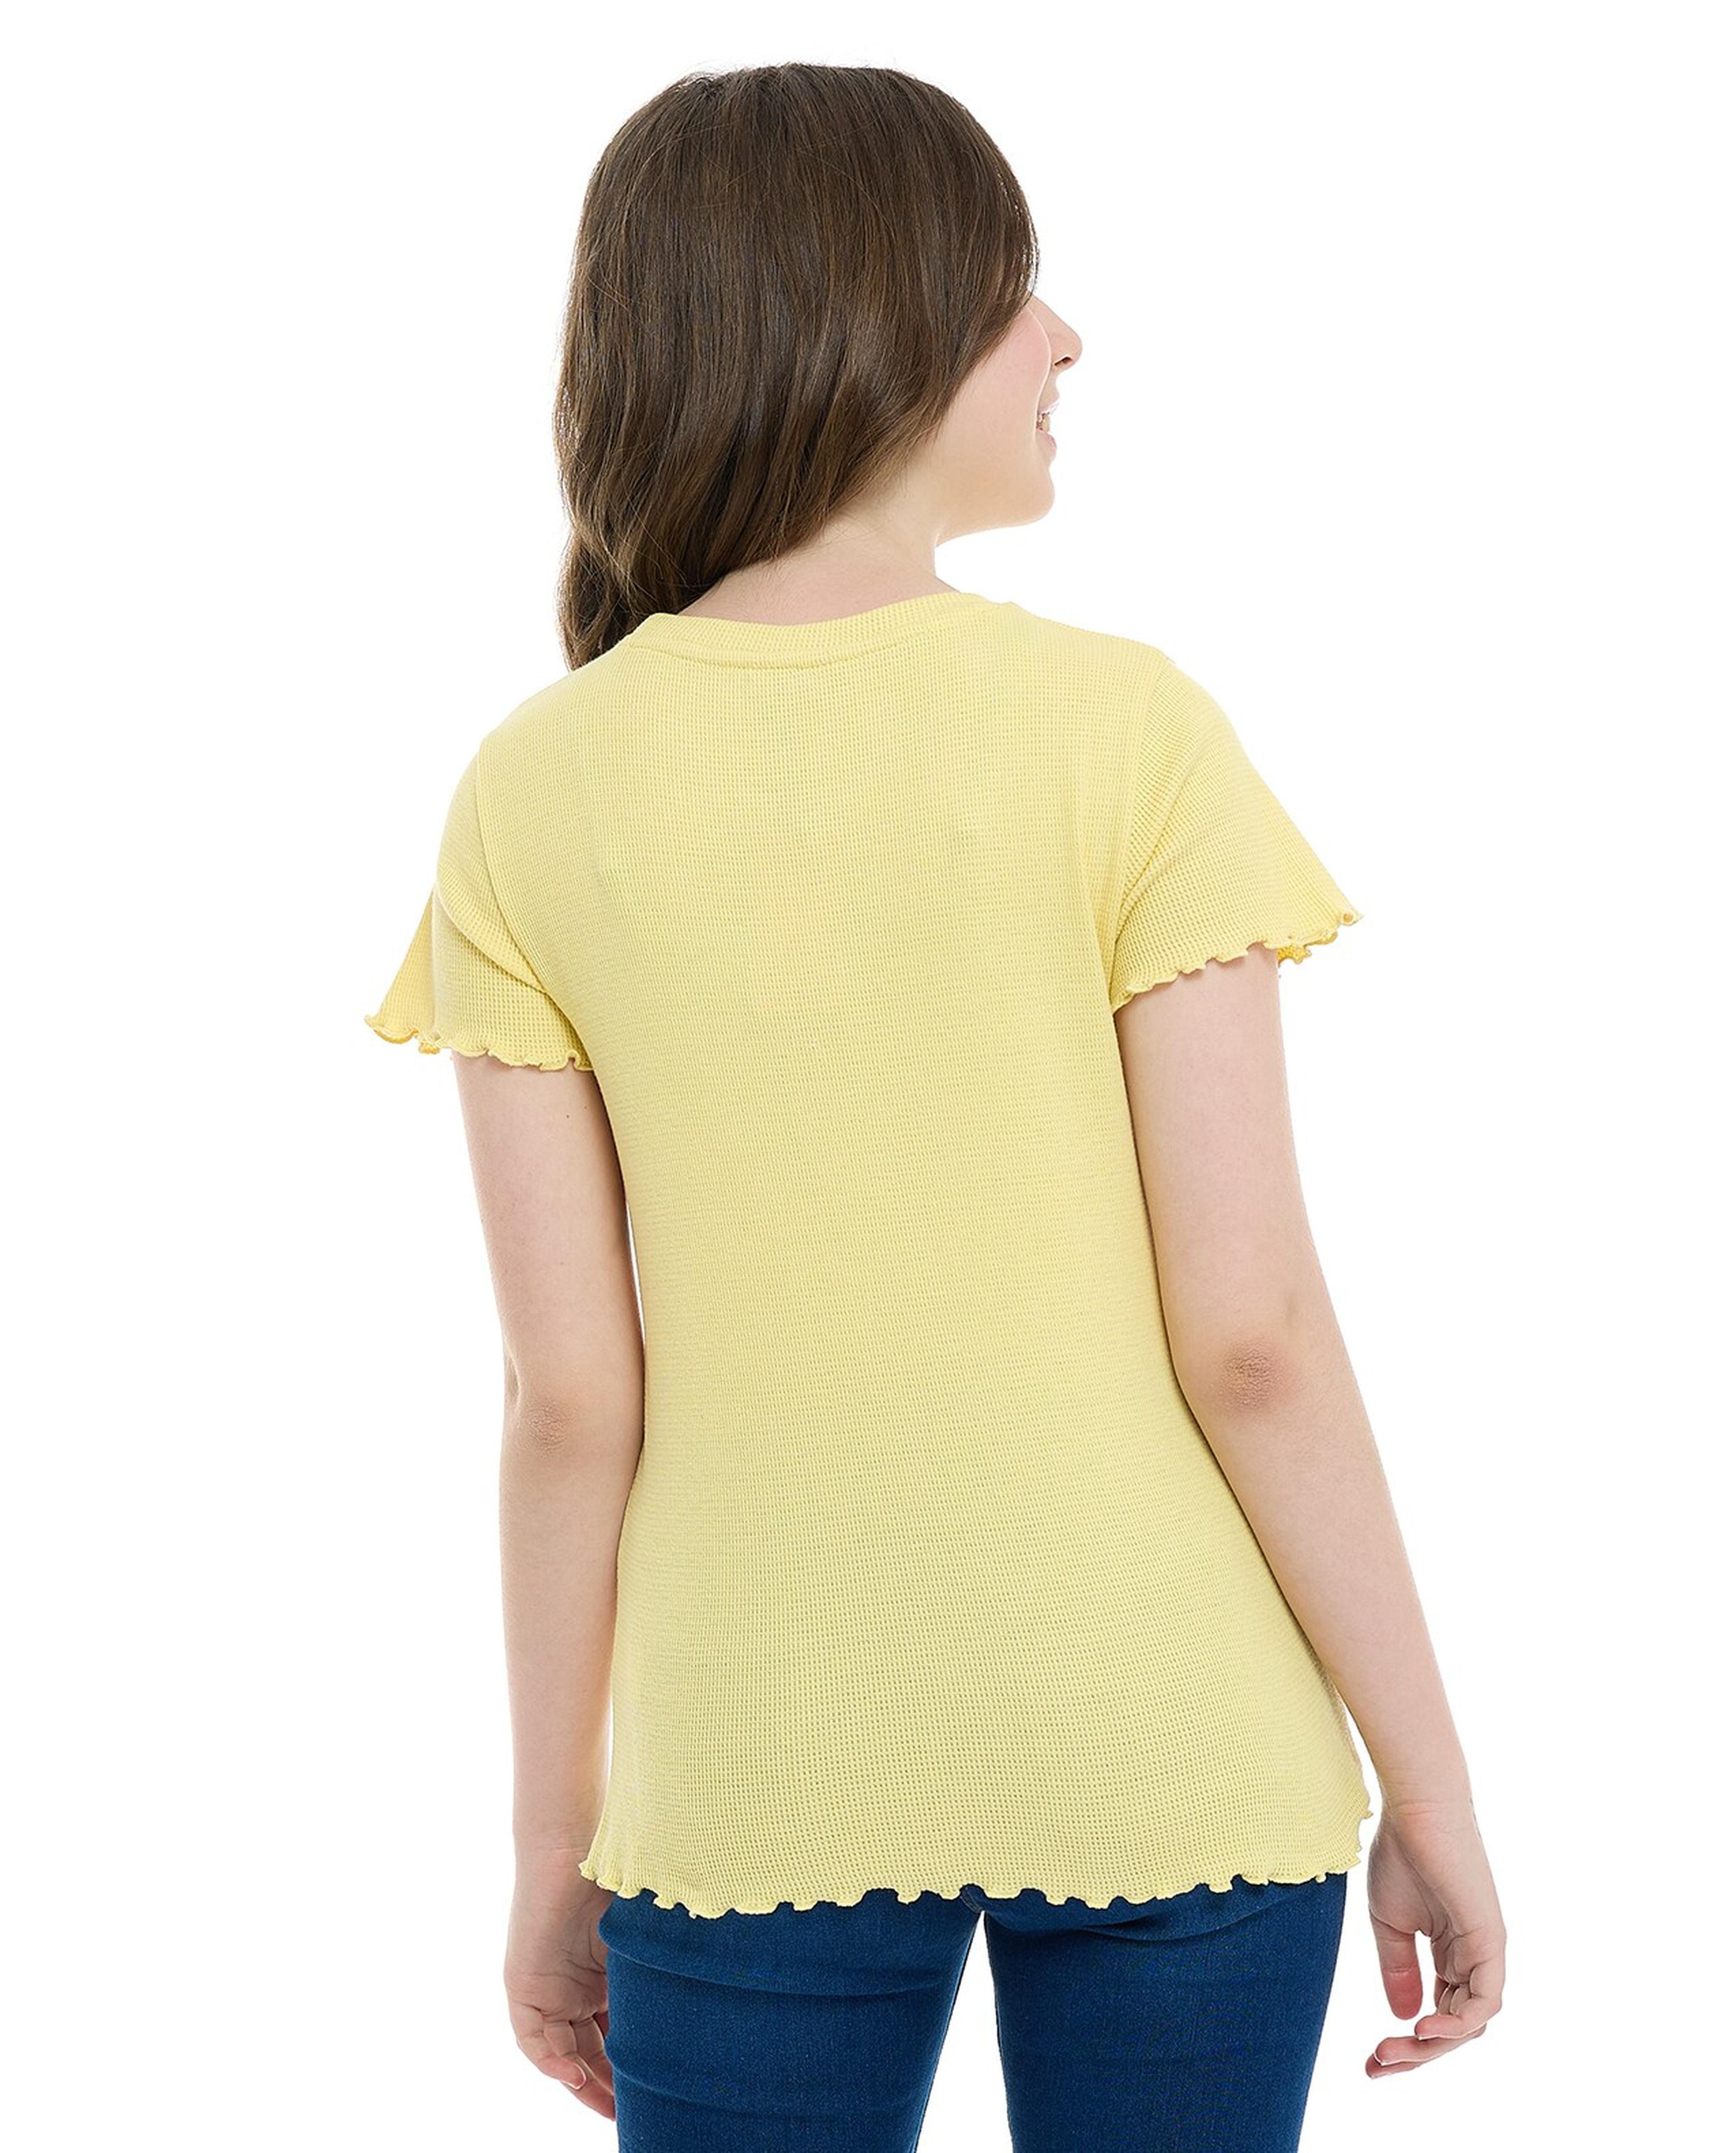 Waffle Textured Top with Crew Neck and Short Sleeves